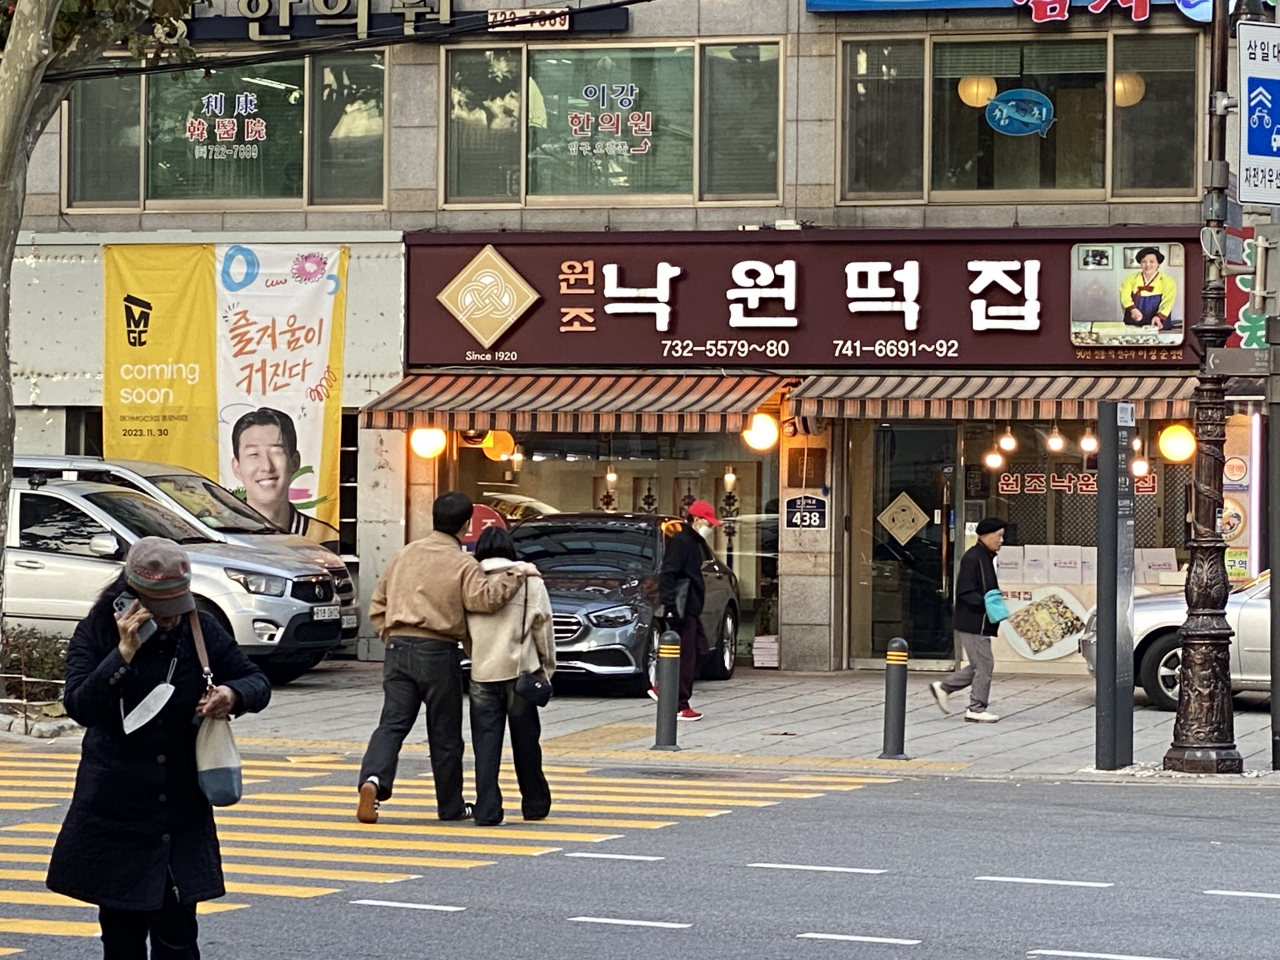 Passersby cross the road in front of Nakwon Tteok House in Jongno, central Seoul, Nov. 14. (Hwang Joo-young/The Korea Herald)